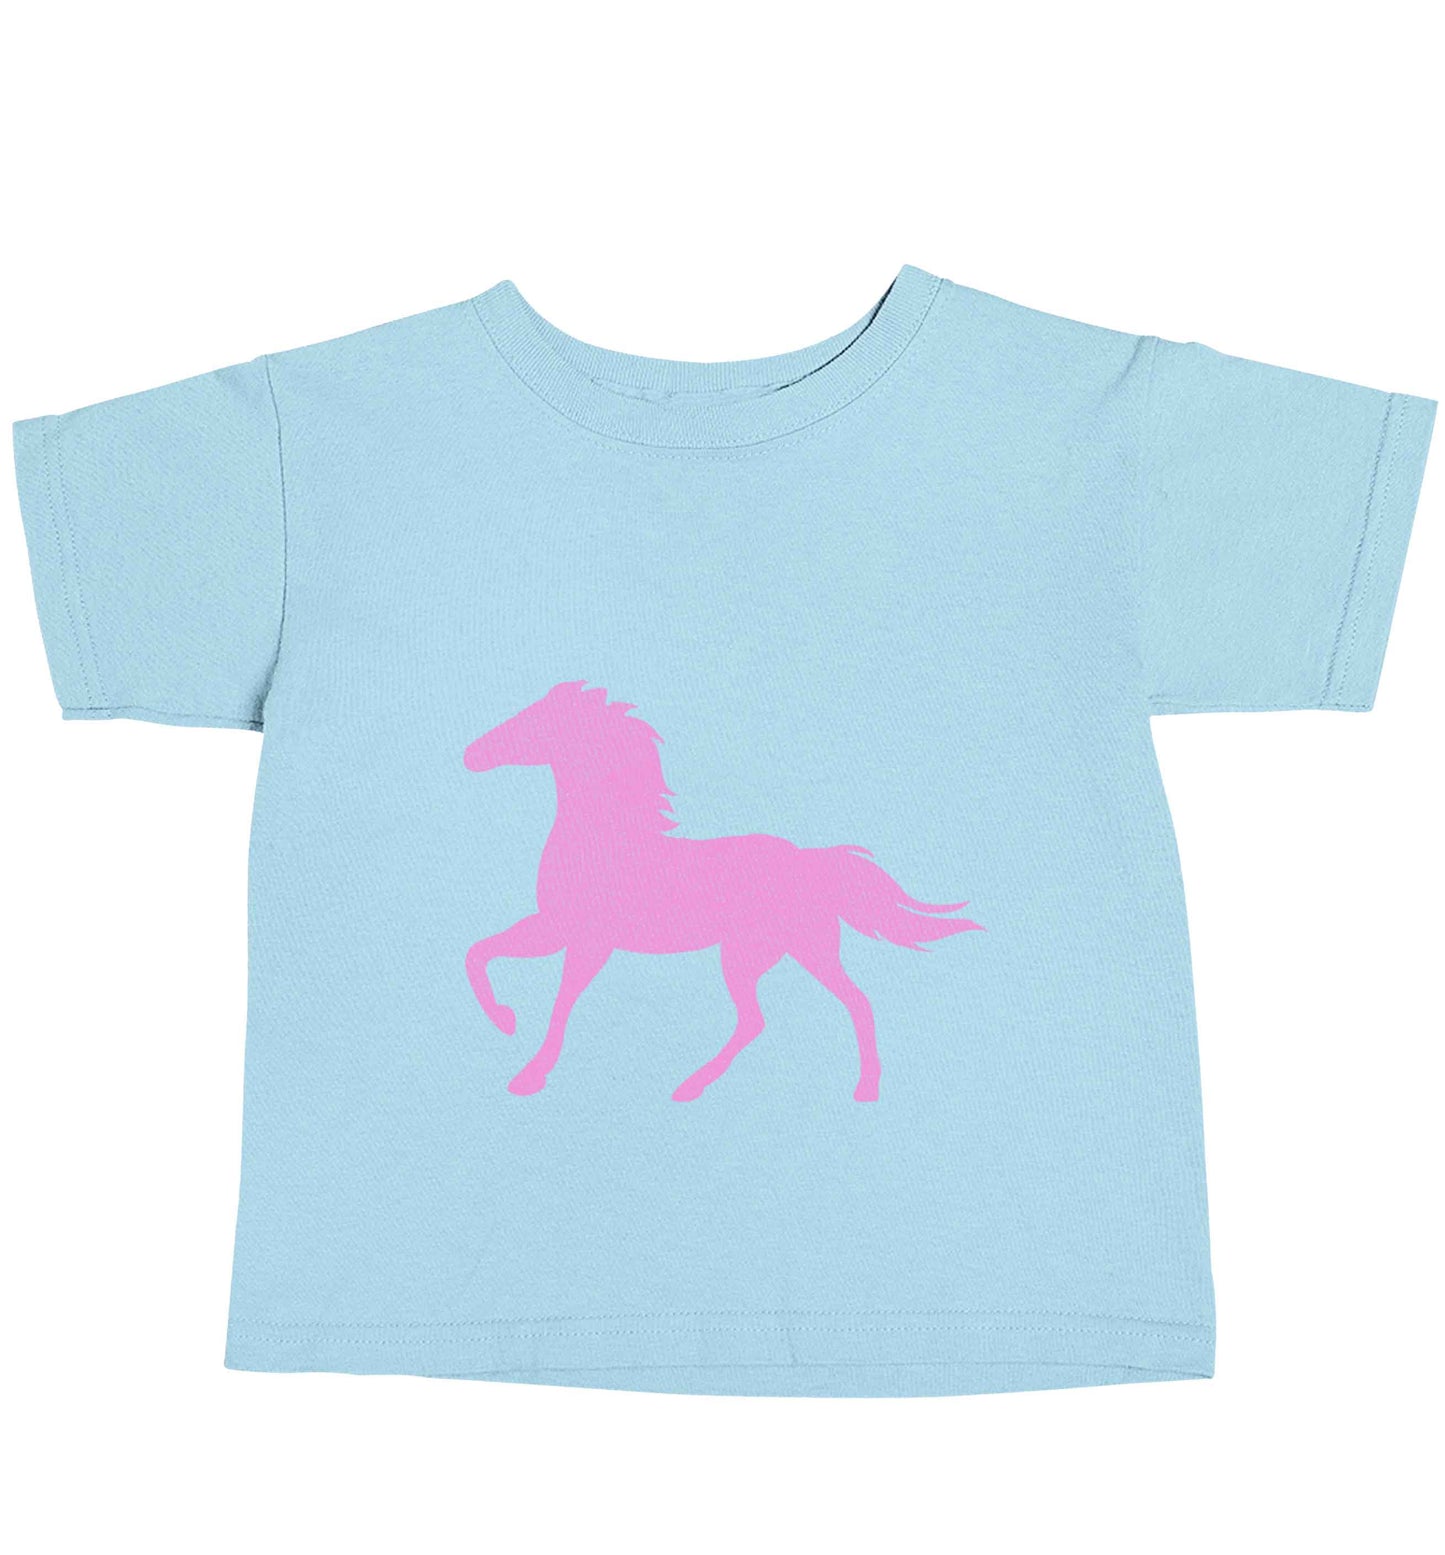 Pink horse light blue baby toddler Tshirt 2 Years